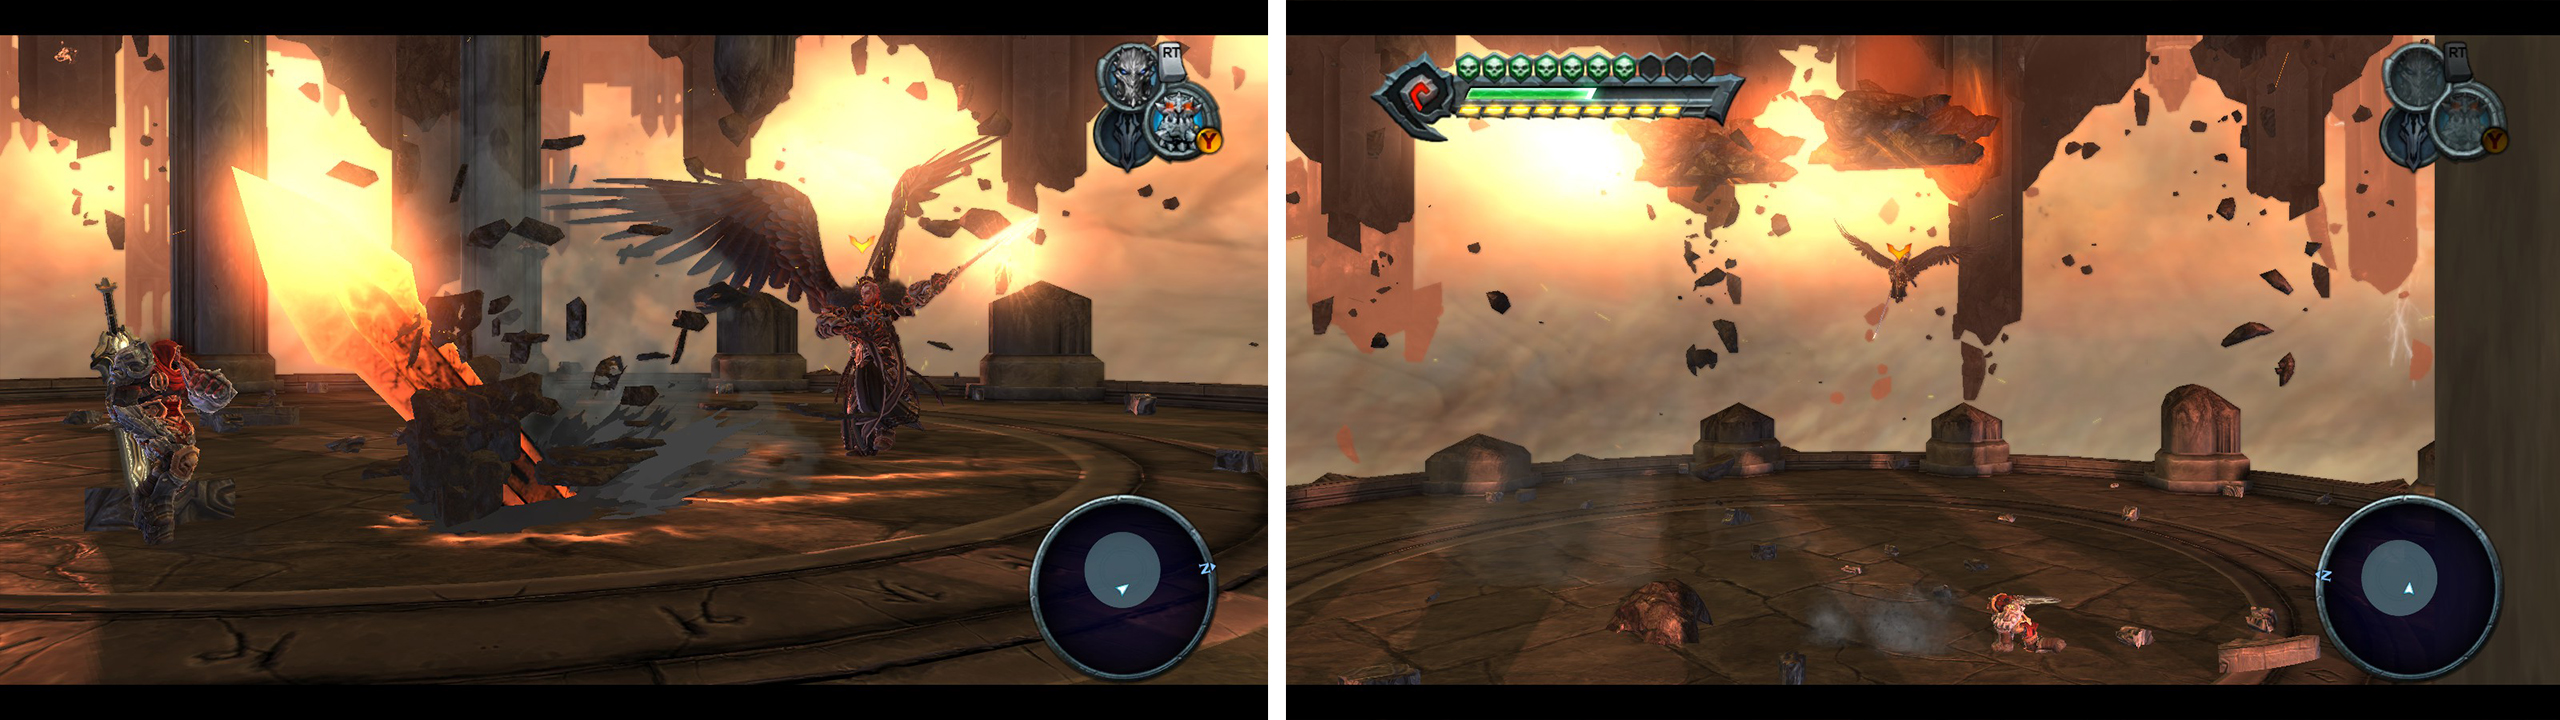 To beat the boss, you need to avoid his attacks (left) whilst sneaking in a few of your own when there is an opening. Be sure to dodge the rocks that he throws at you after taking damage (right).